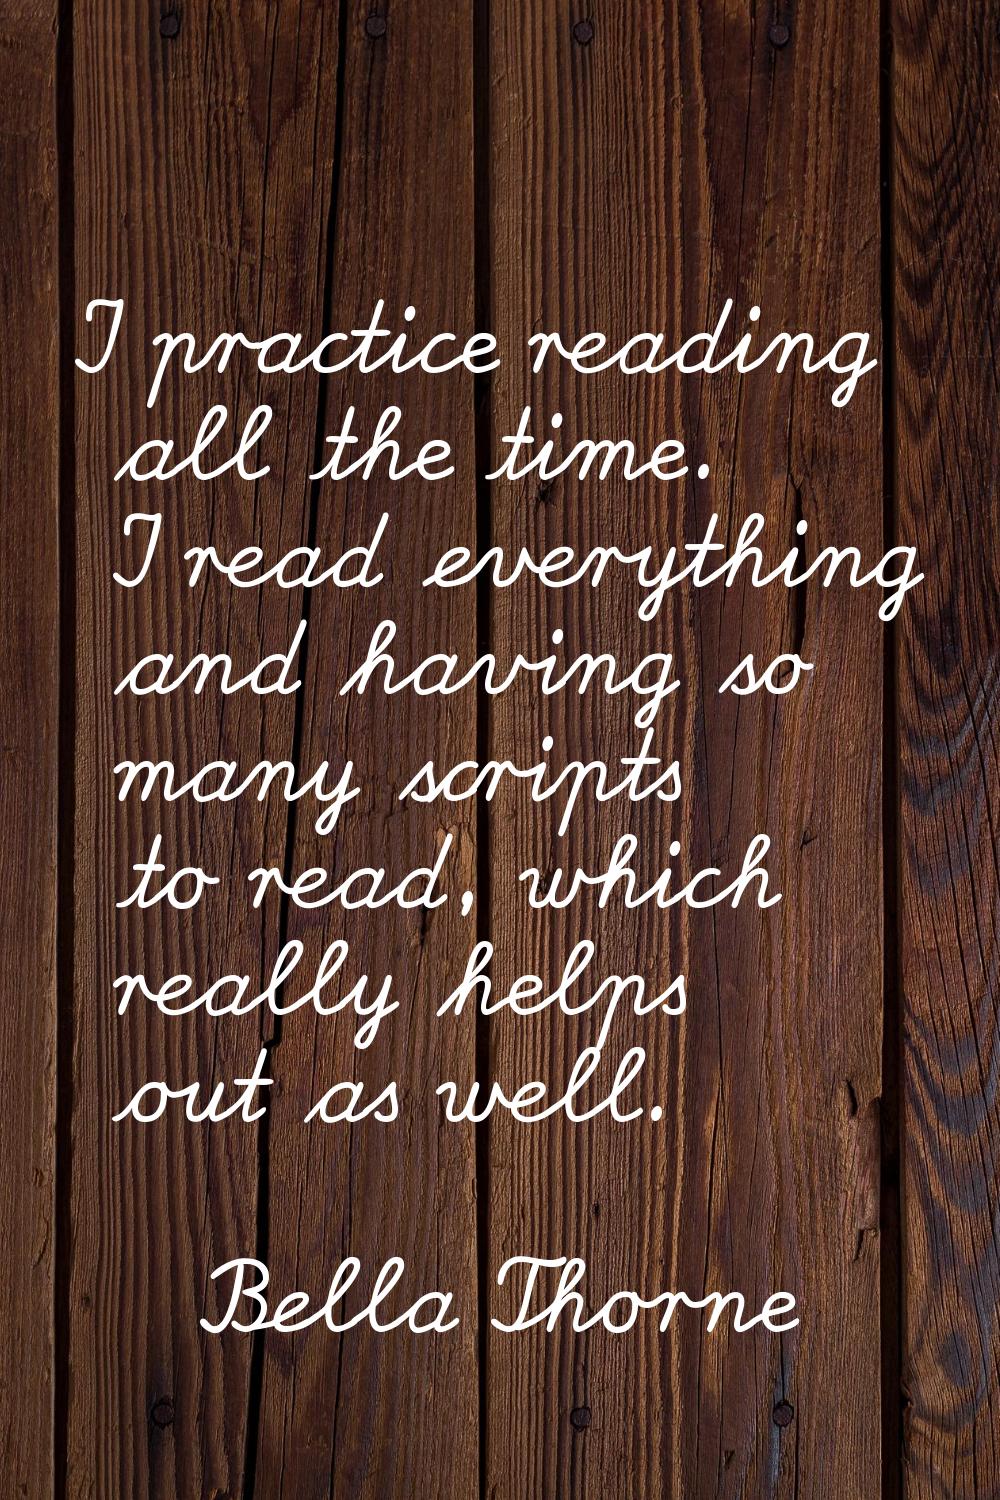 I practice reading all the time. I read everything and having so many scripts to read, which really